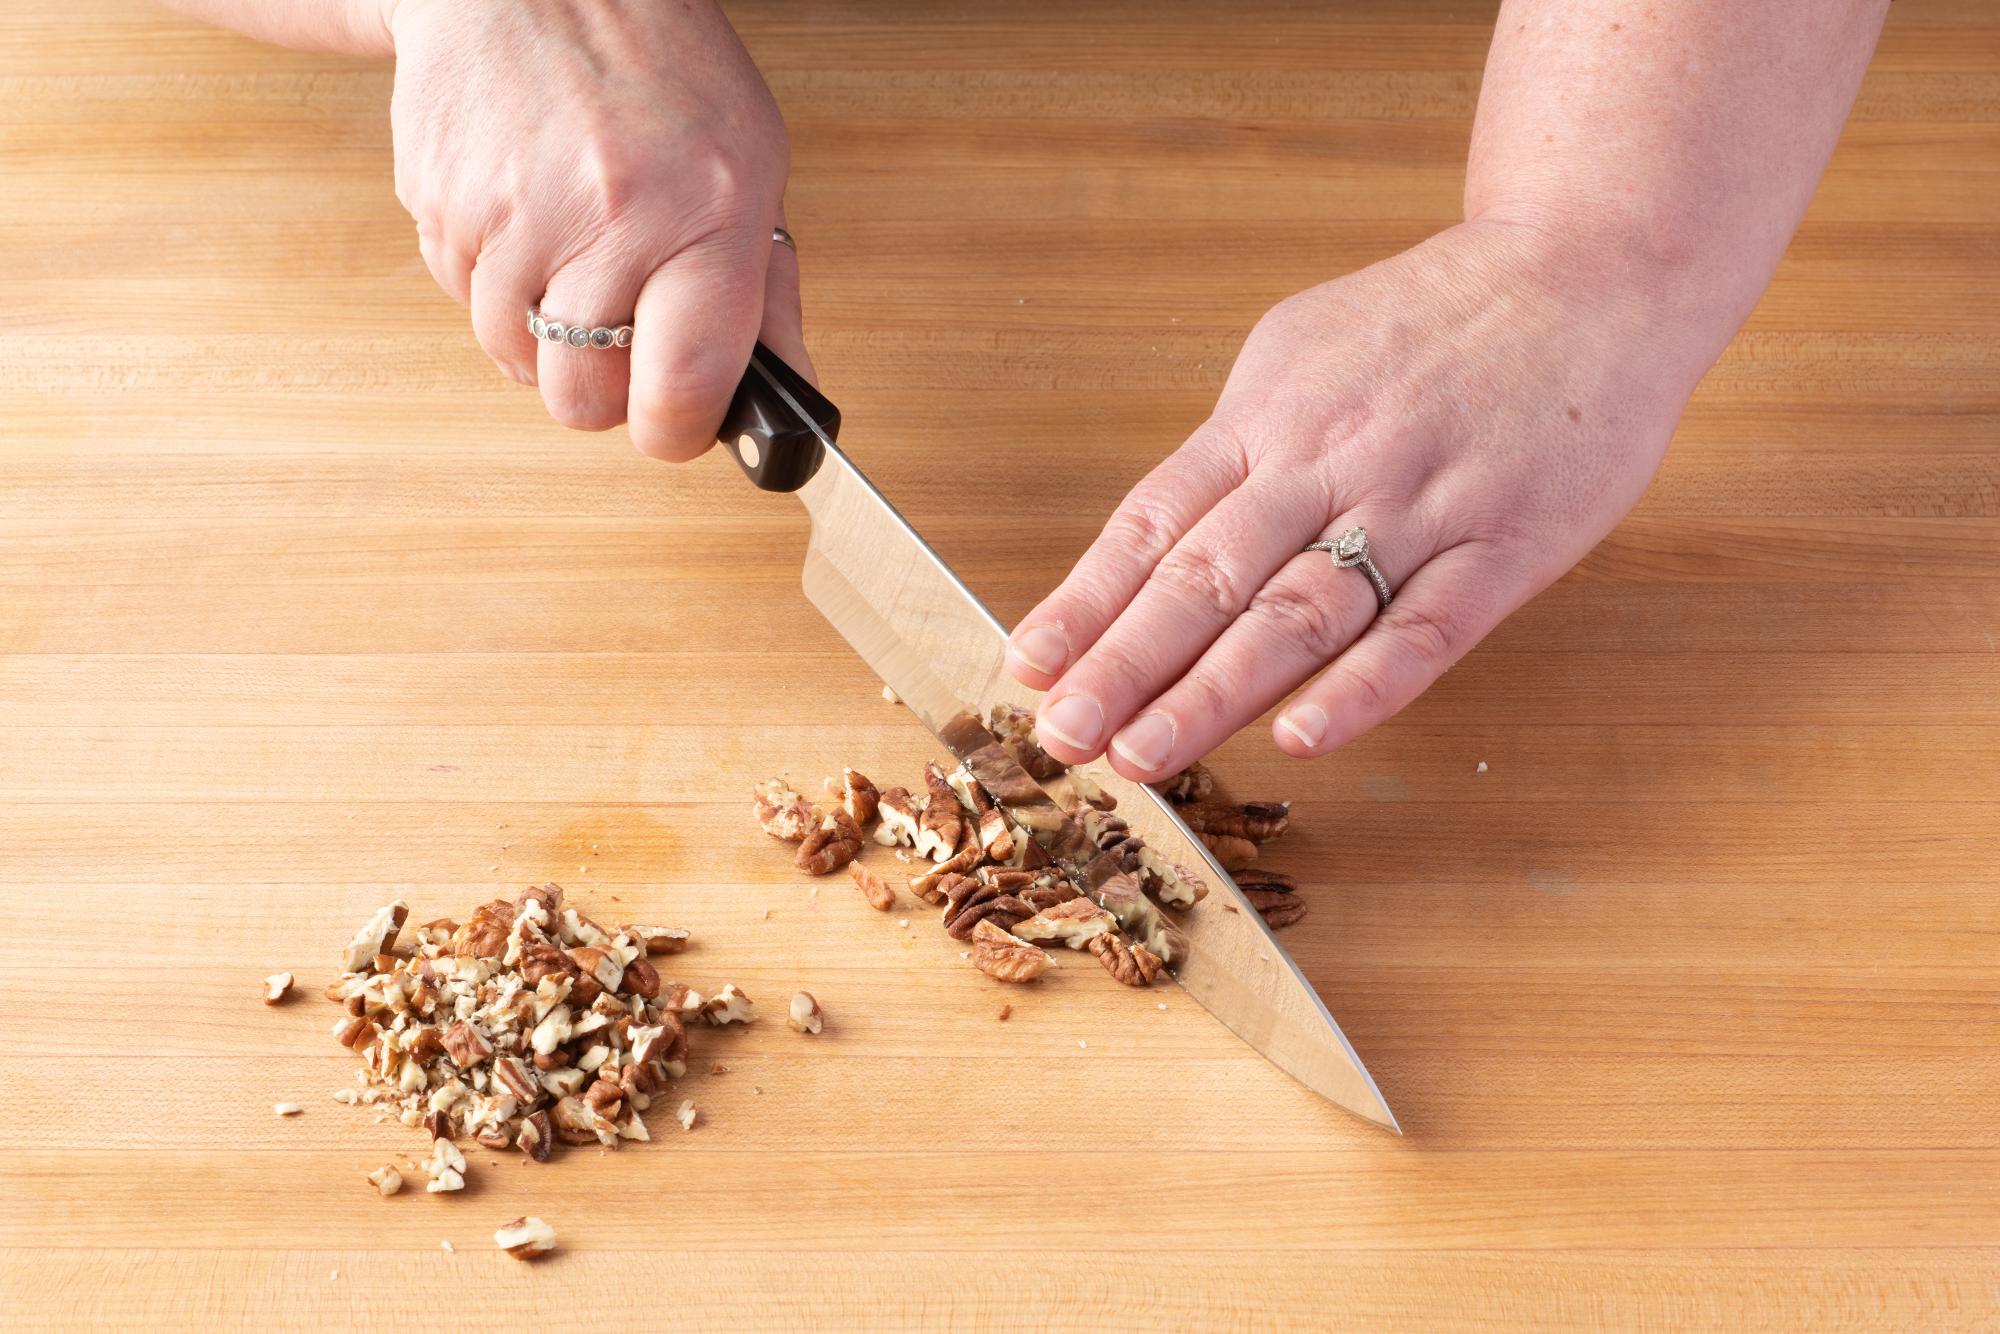 Use a Petite Chef to chop pecans.